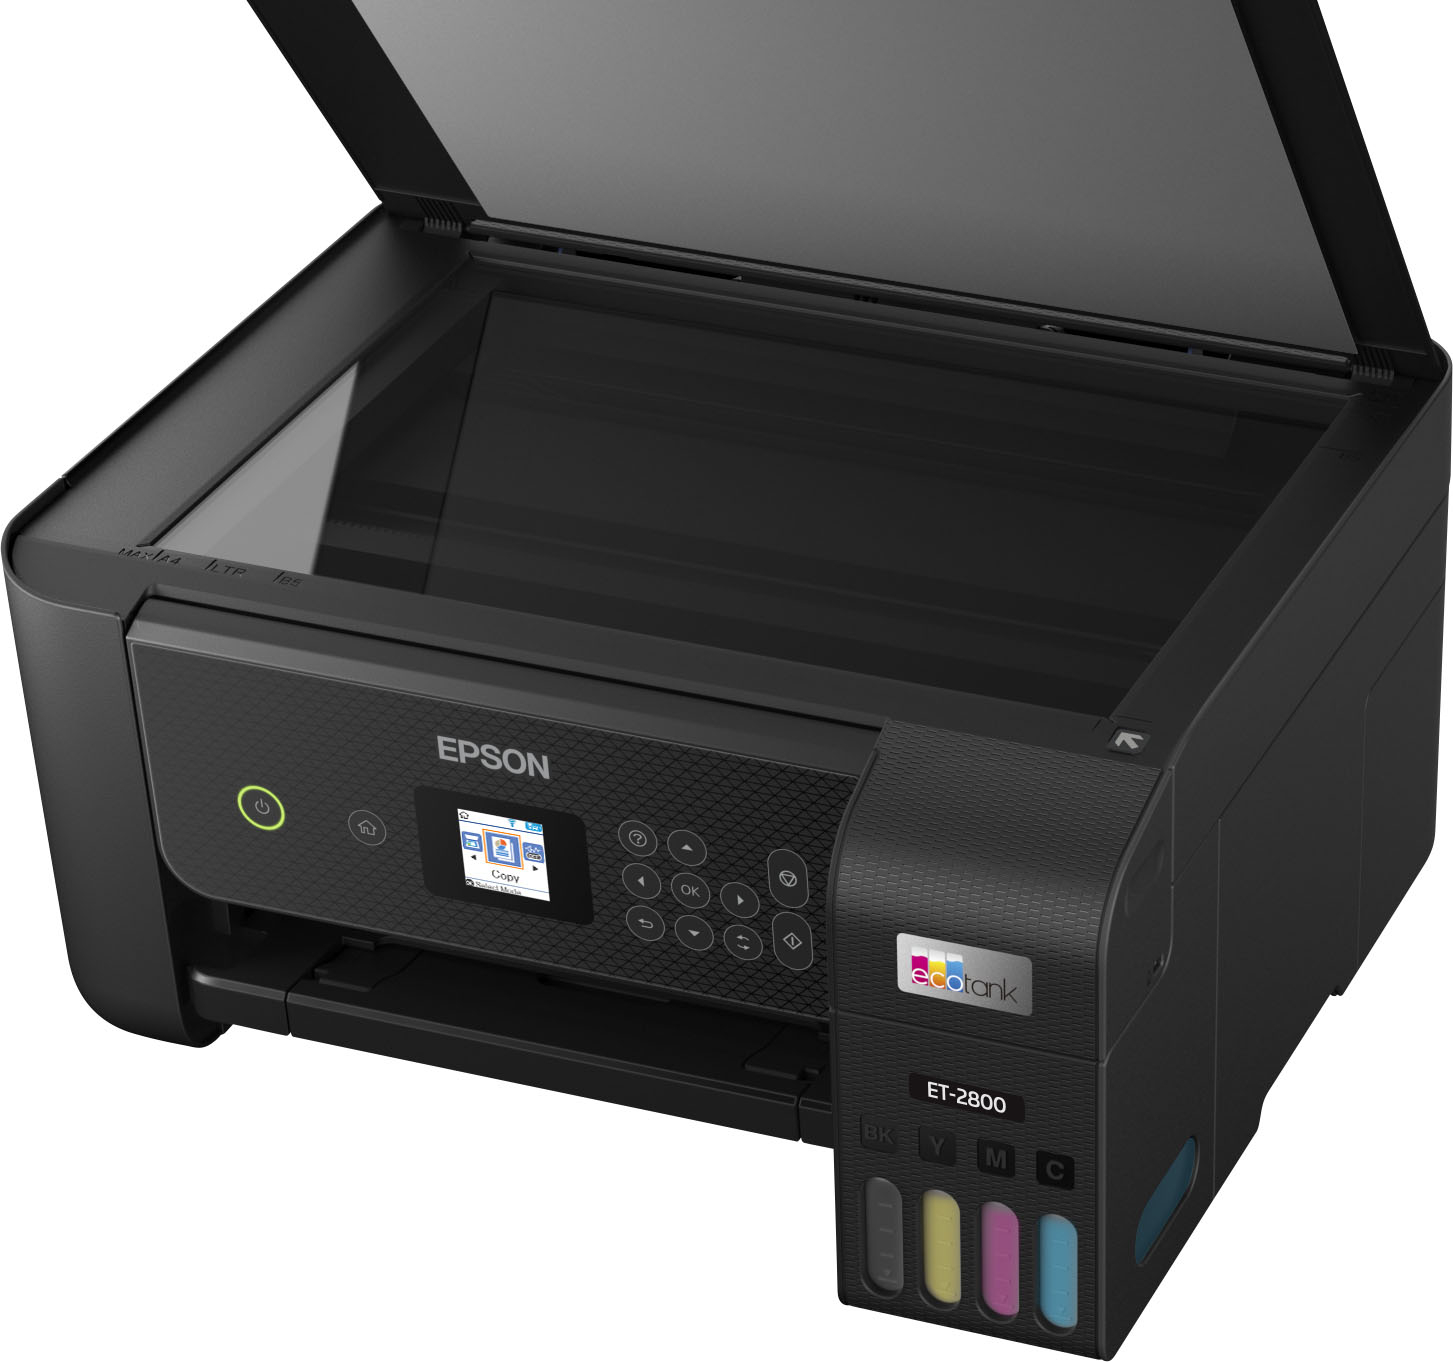 Epson EcoTank ET-2800 review: the great prints keep rolling